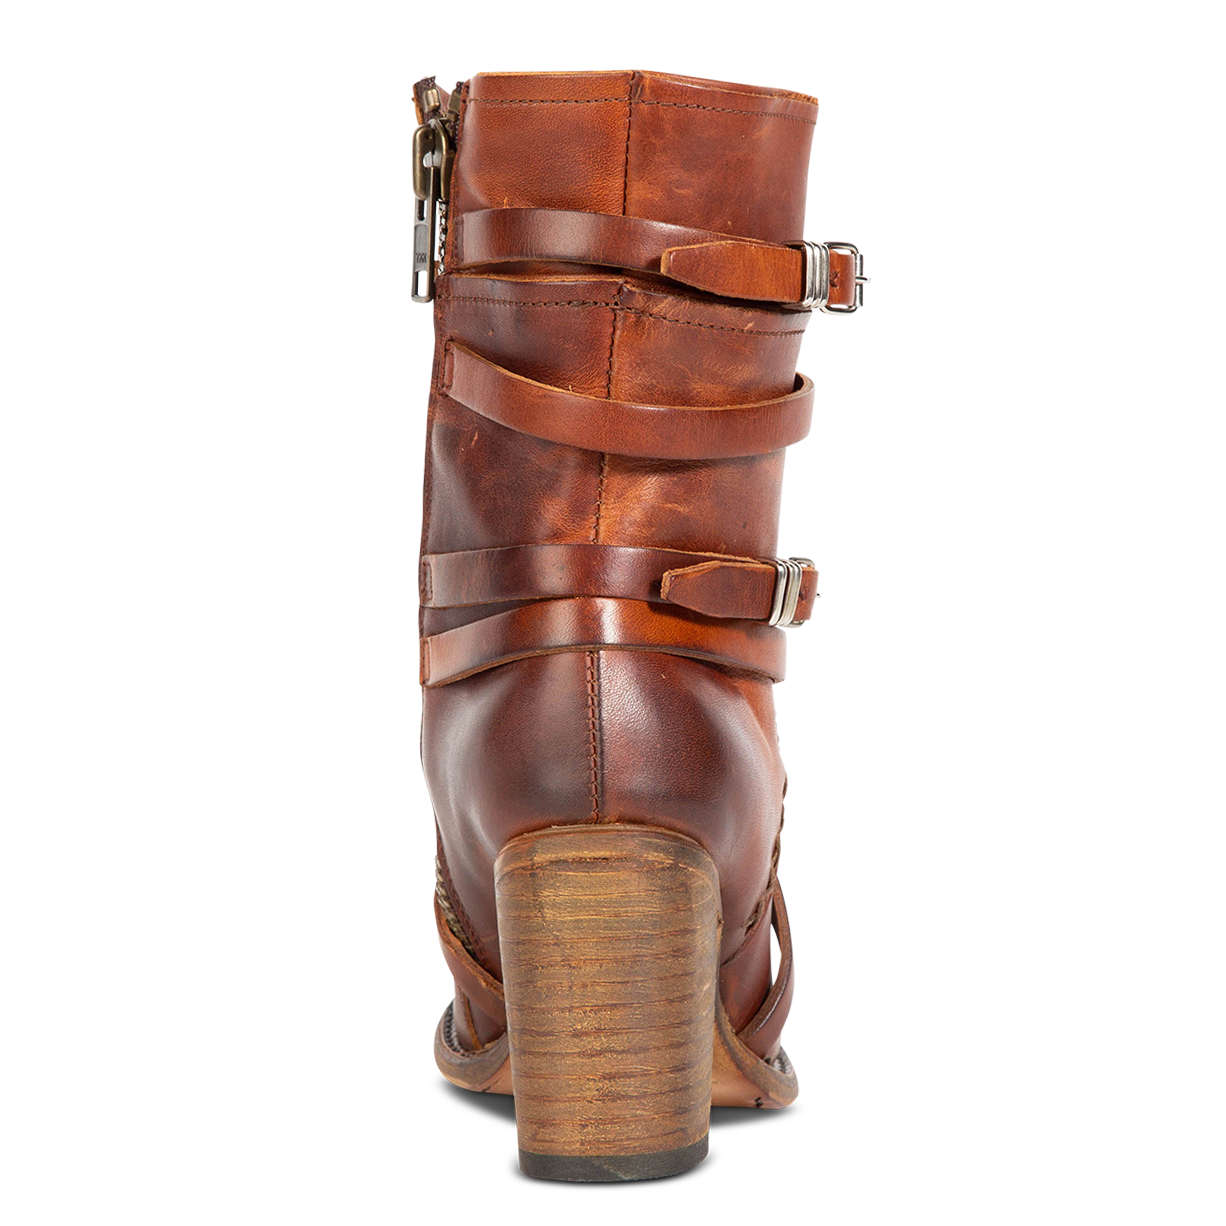 Back view showing adjustable leather straps with silver hardware on FREEBIRD women's Baker cognac boot